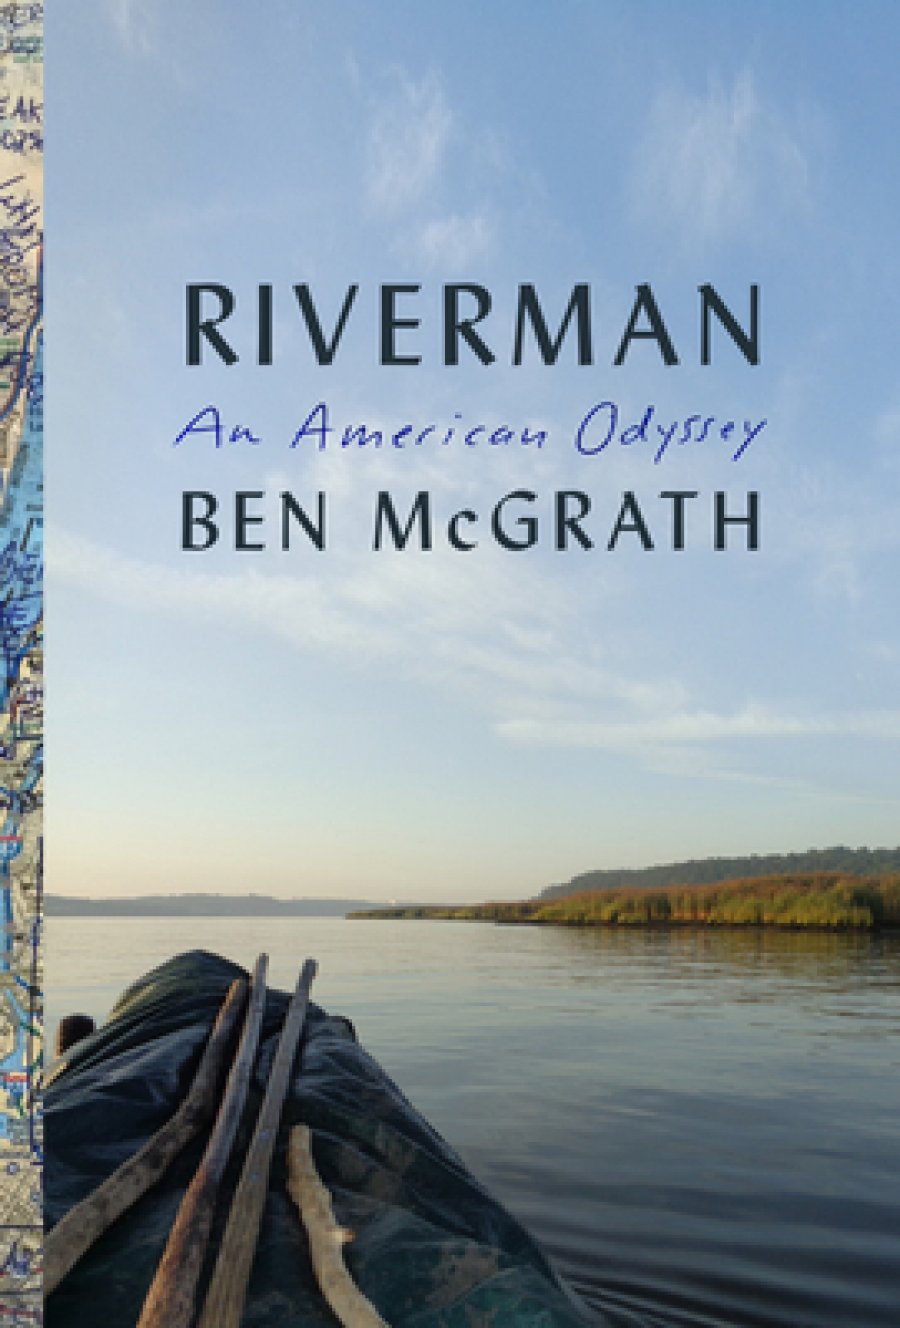 New Yorker staff writer Ben McGrath celebrates the release of his debut book at Northshire Bookstore Saratoga on April 8.